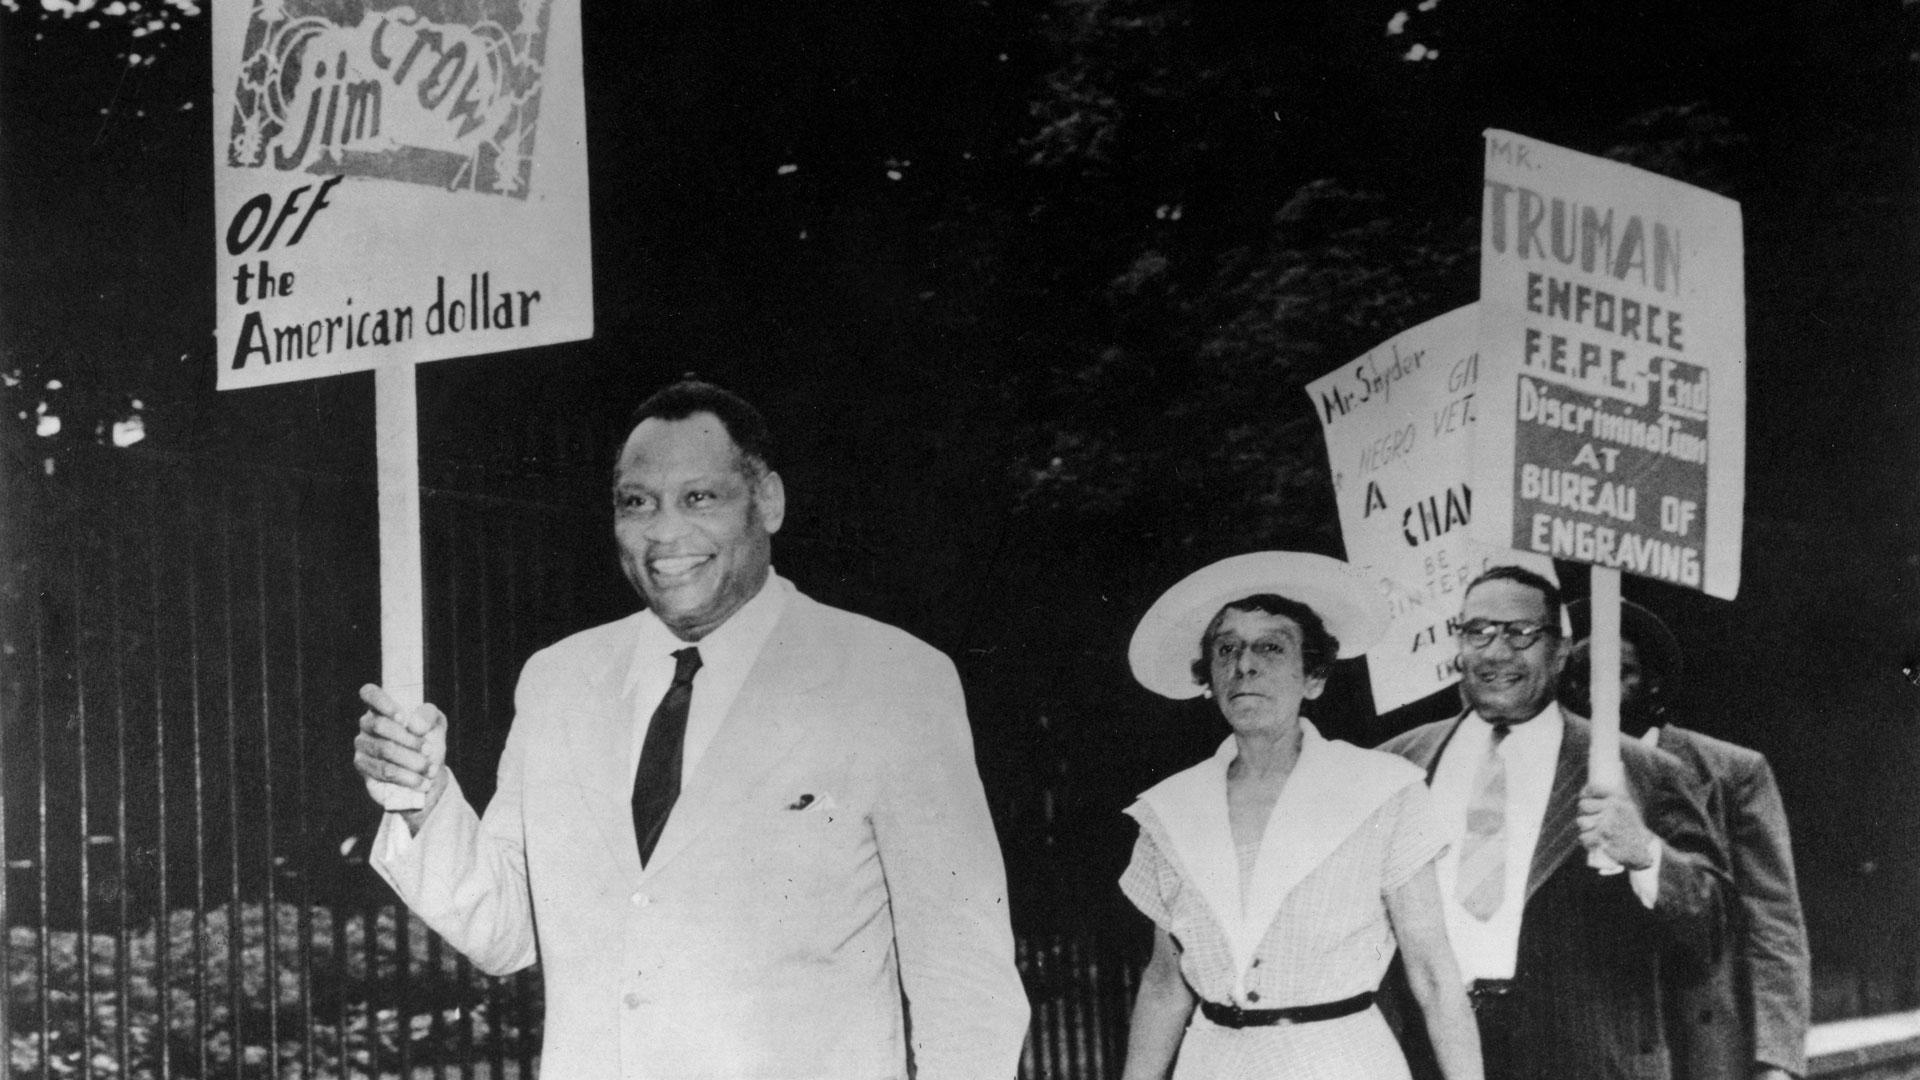 Paul Robeson walking with banner at anti-segregation march 1948